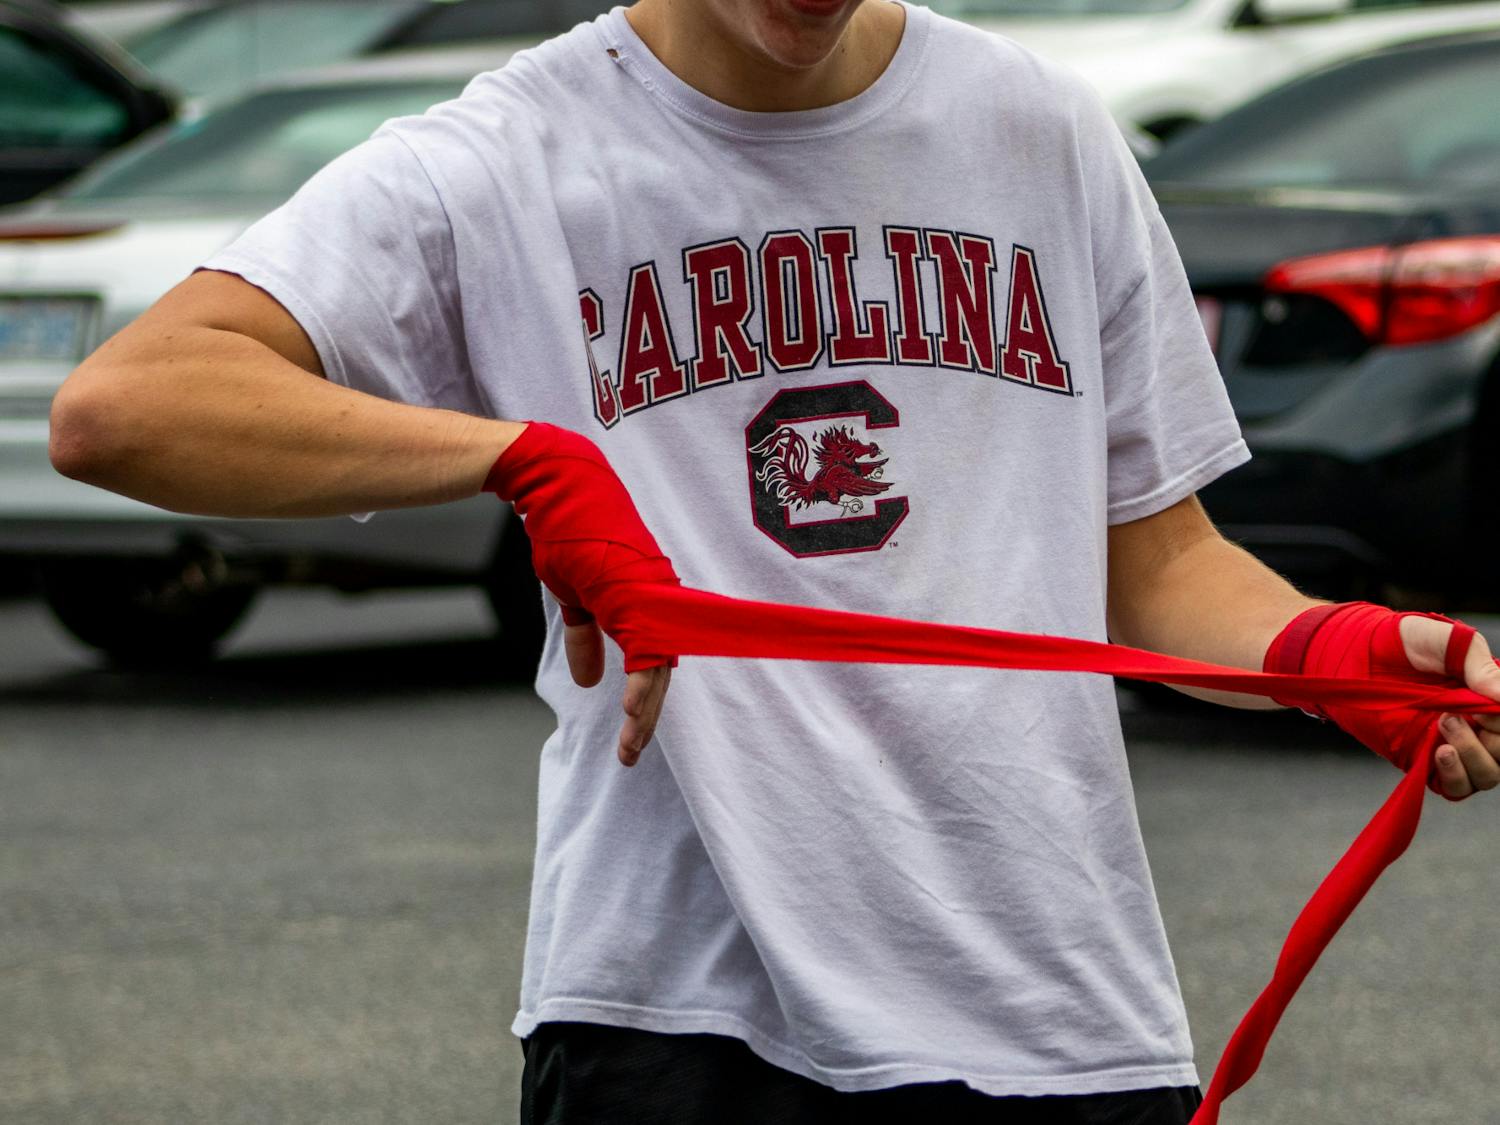 A member of the Carolina Boxing Club wraps his hands before practice. The Carolina Boxing Club gathered Sept.12, 2022, at Battle Boxing Gym to prepare for their upcoming season